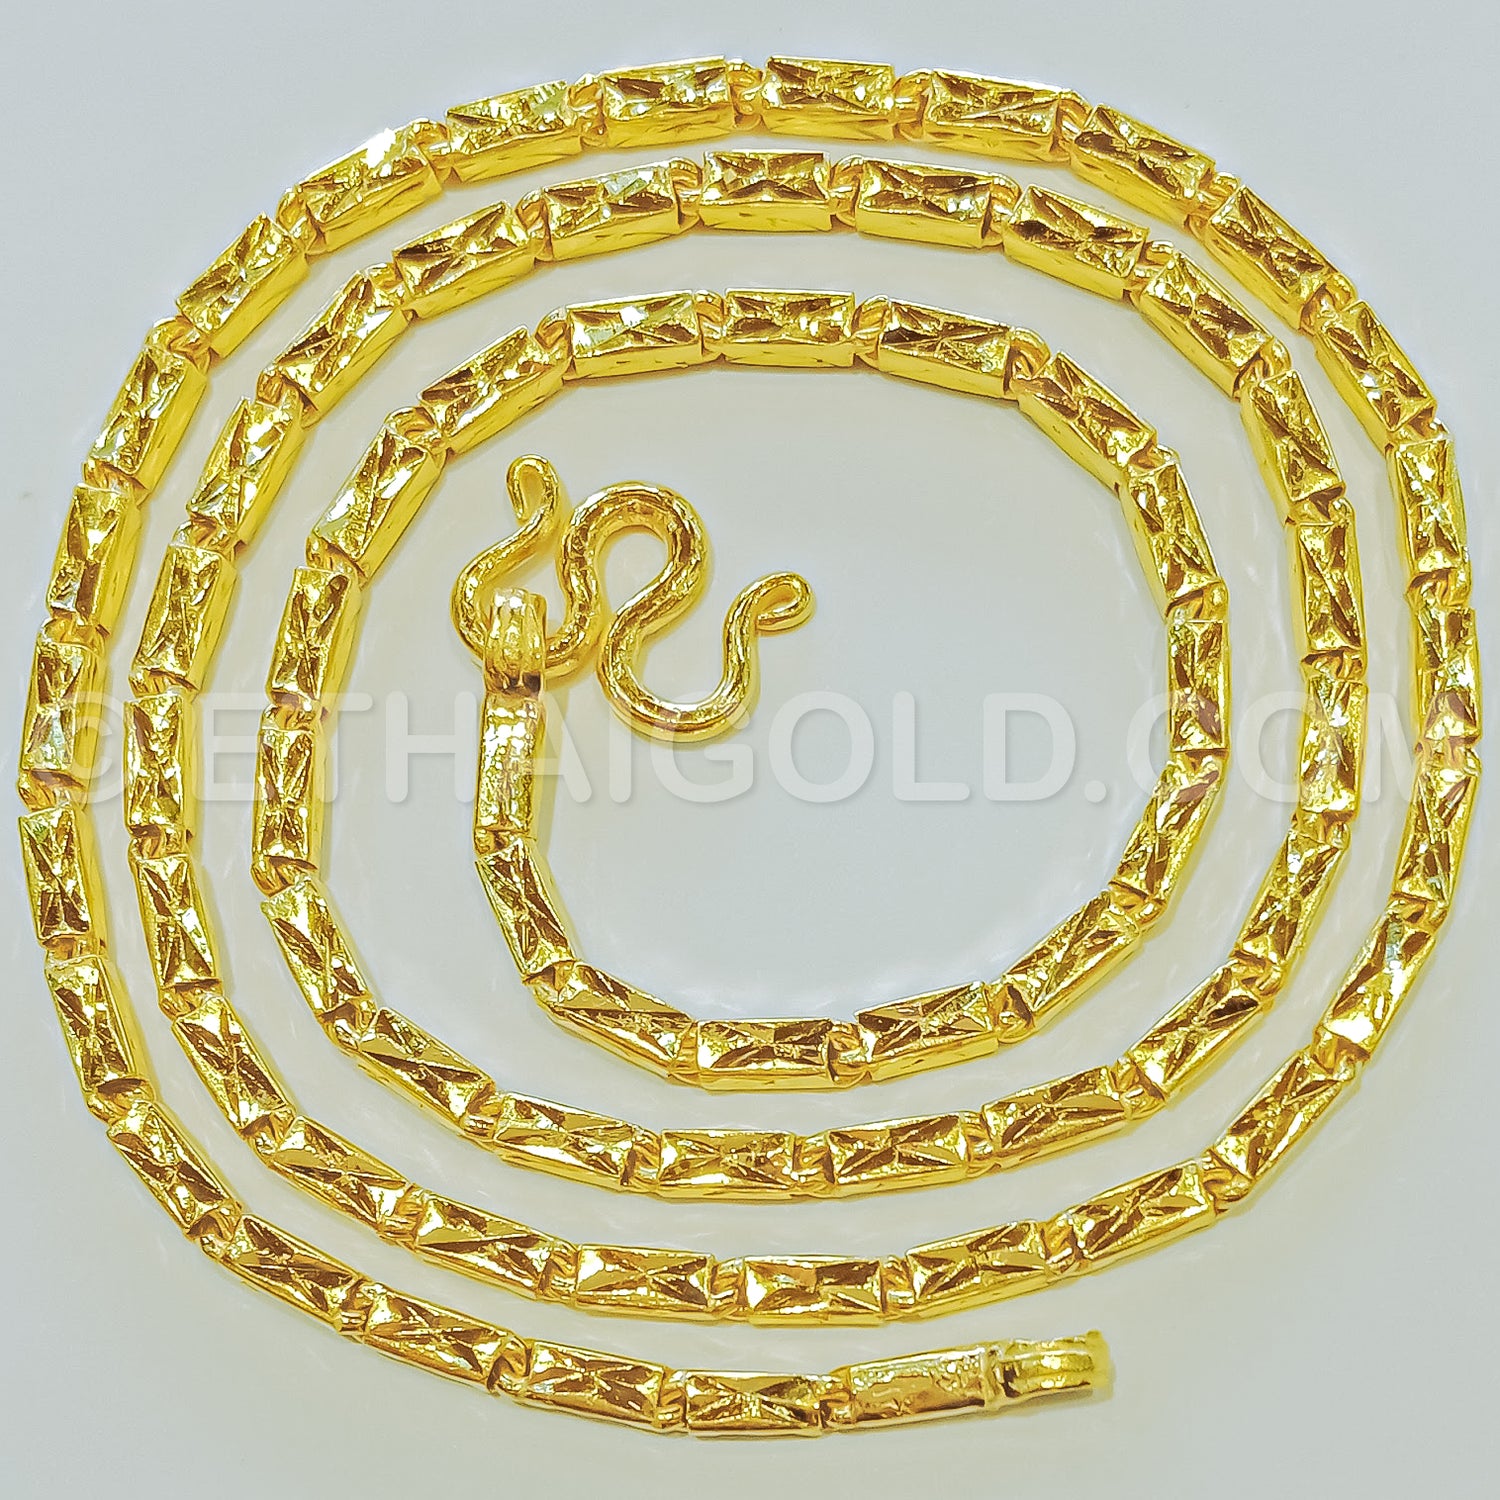 3 Baht Gold Chains